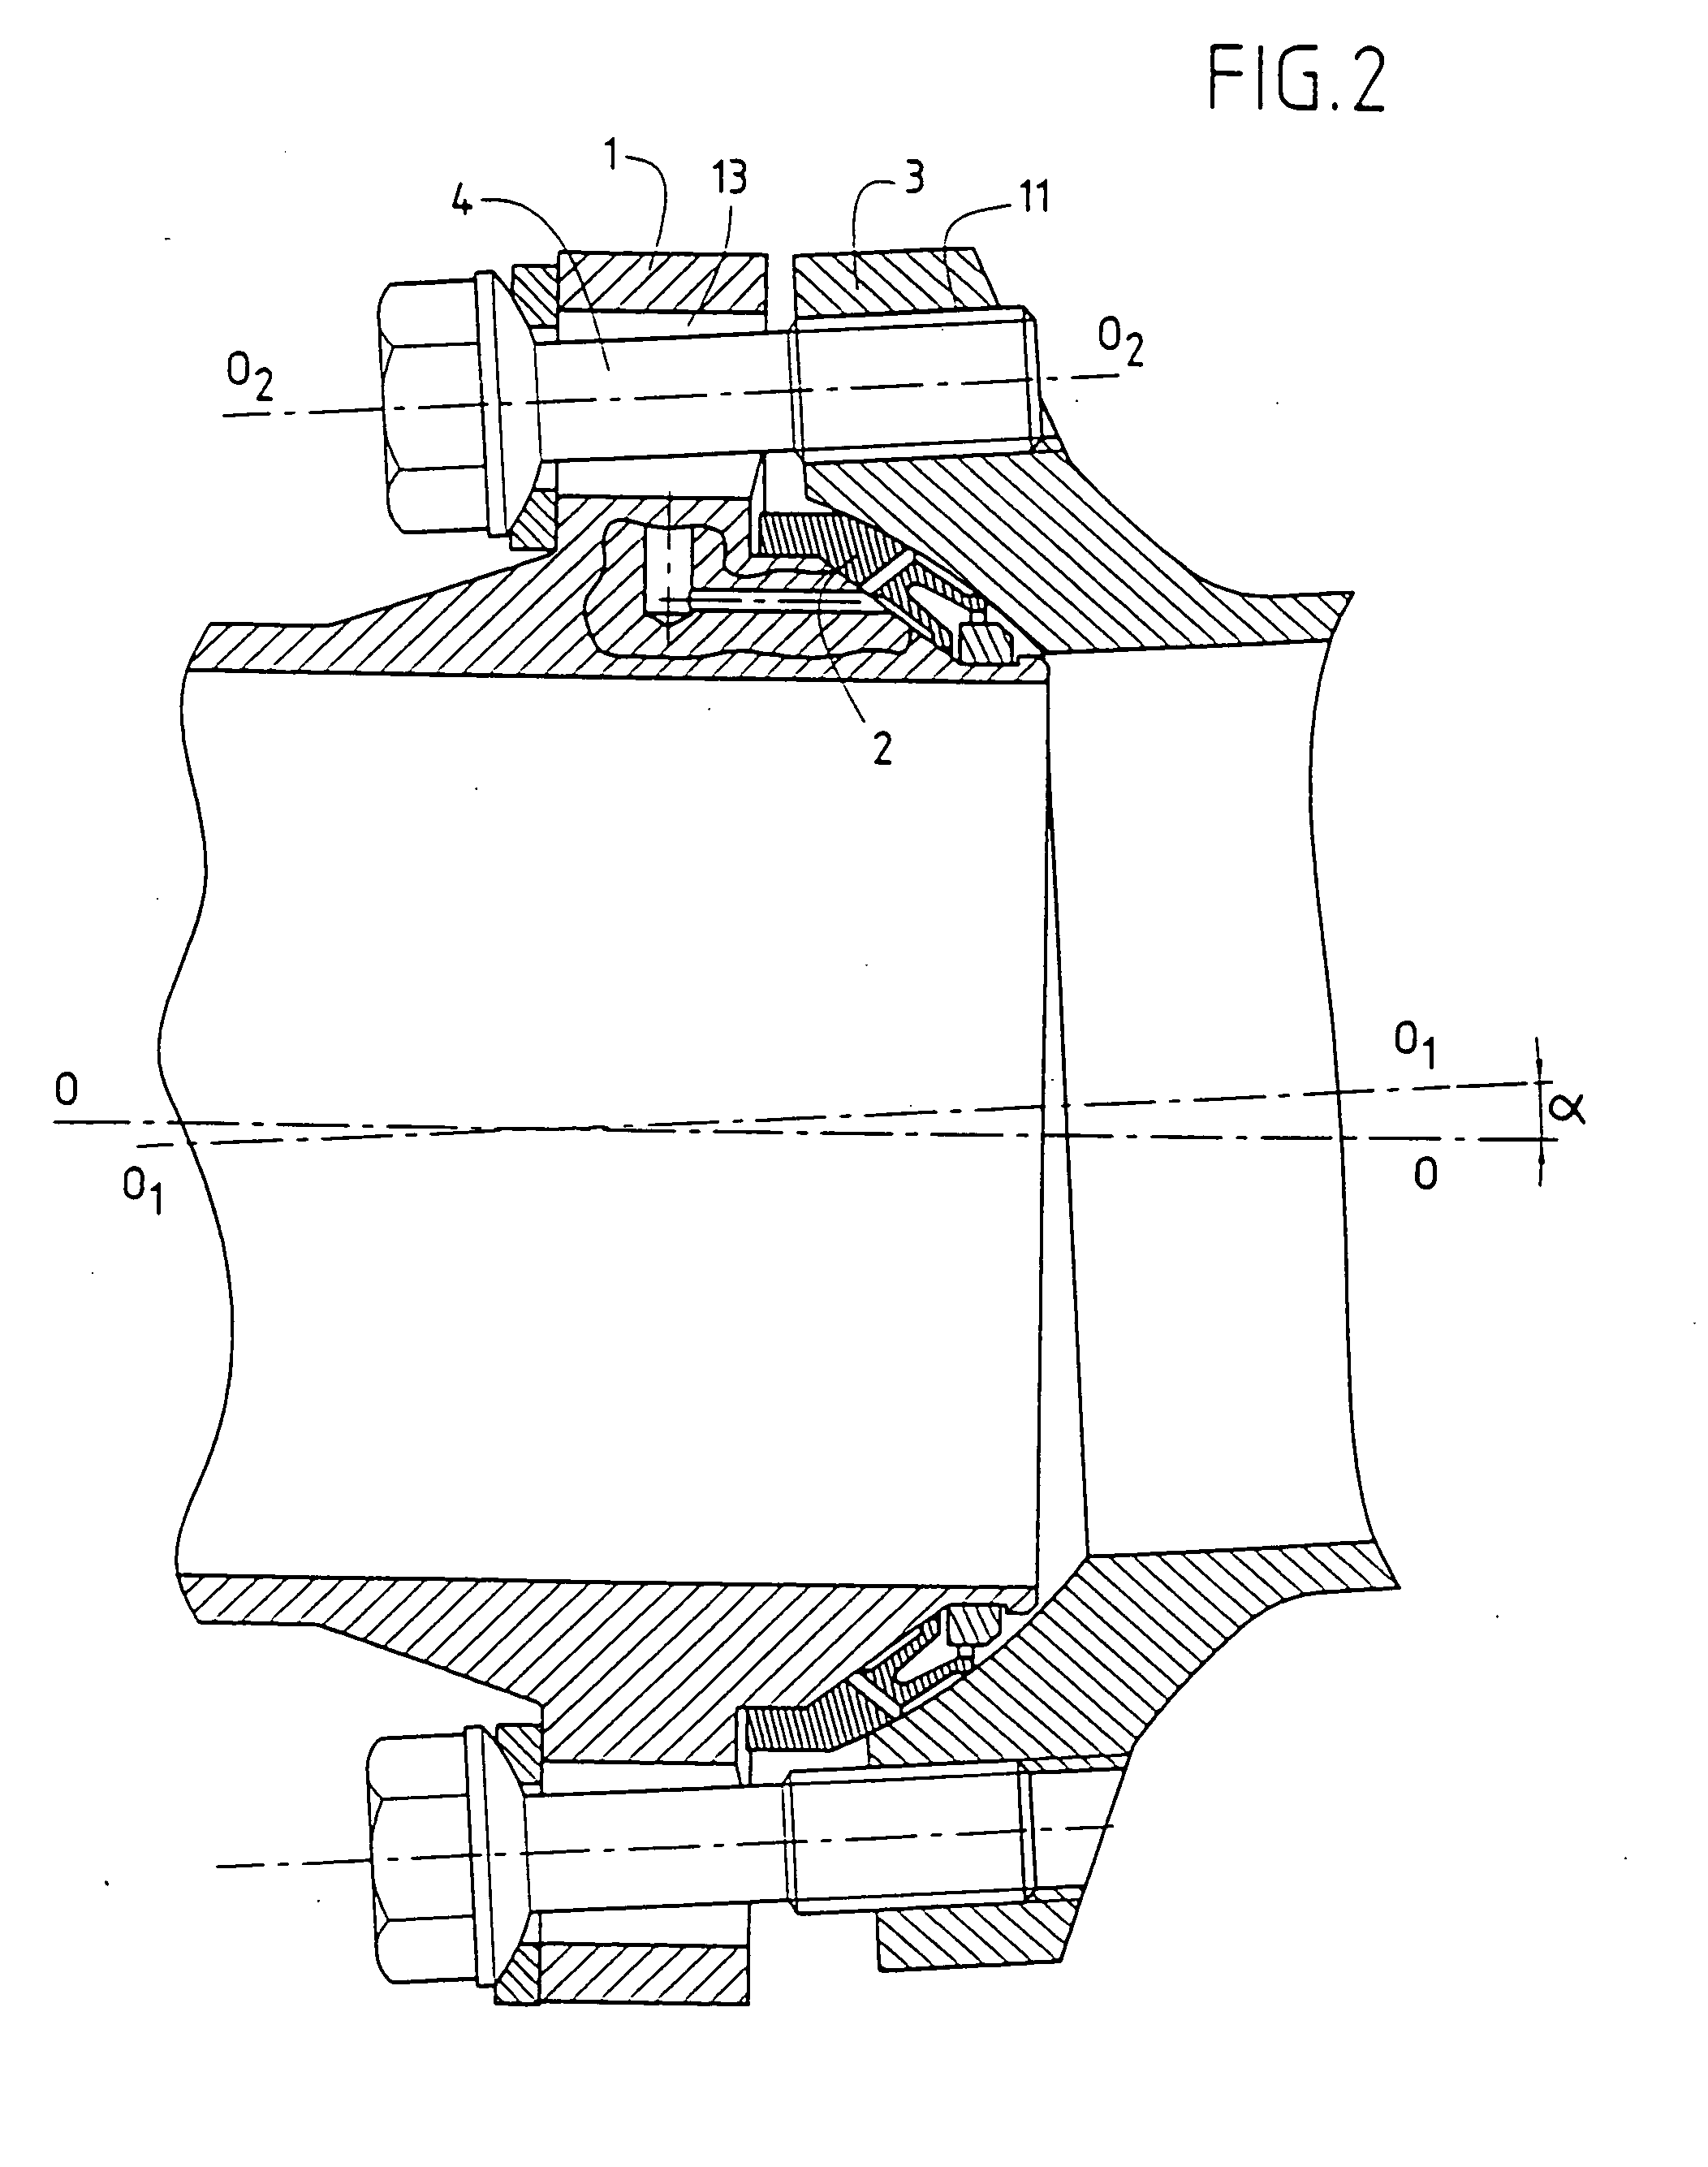 Flanged coupling device with a static ball-and-socket joint